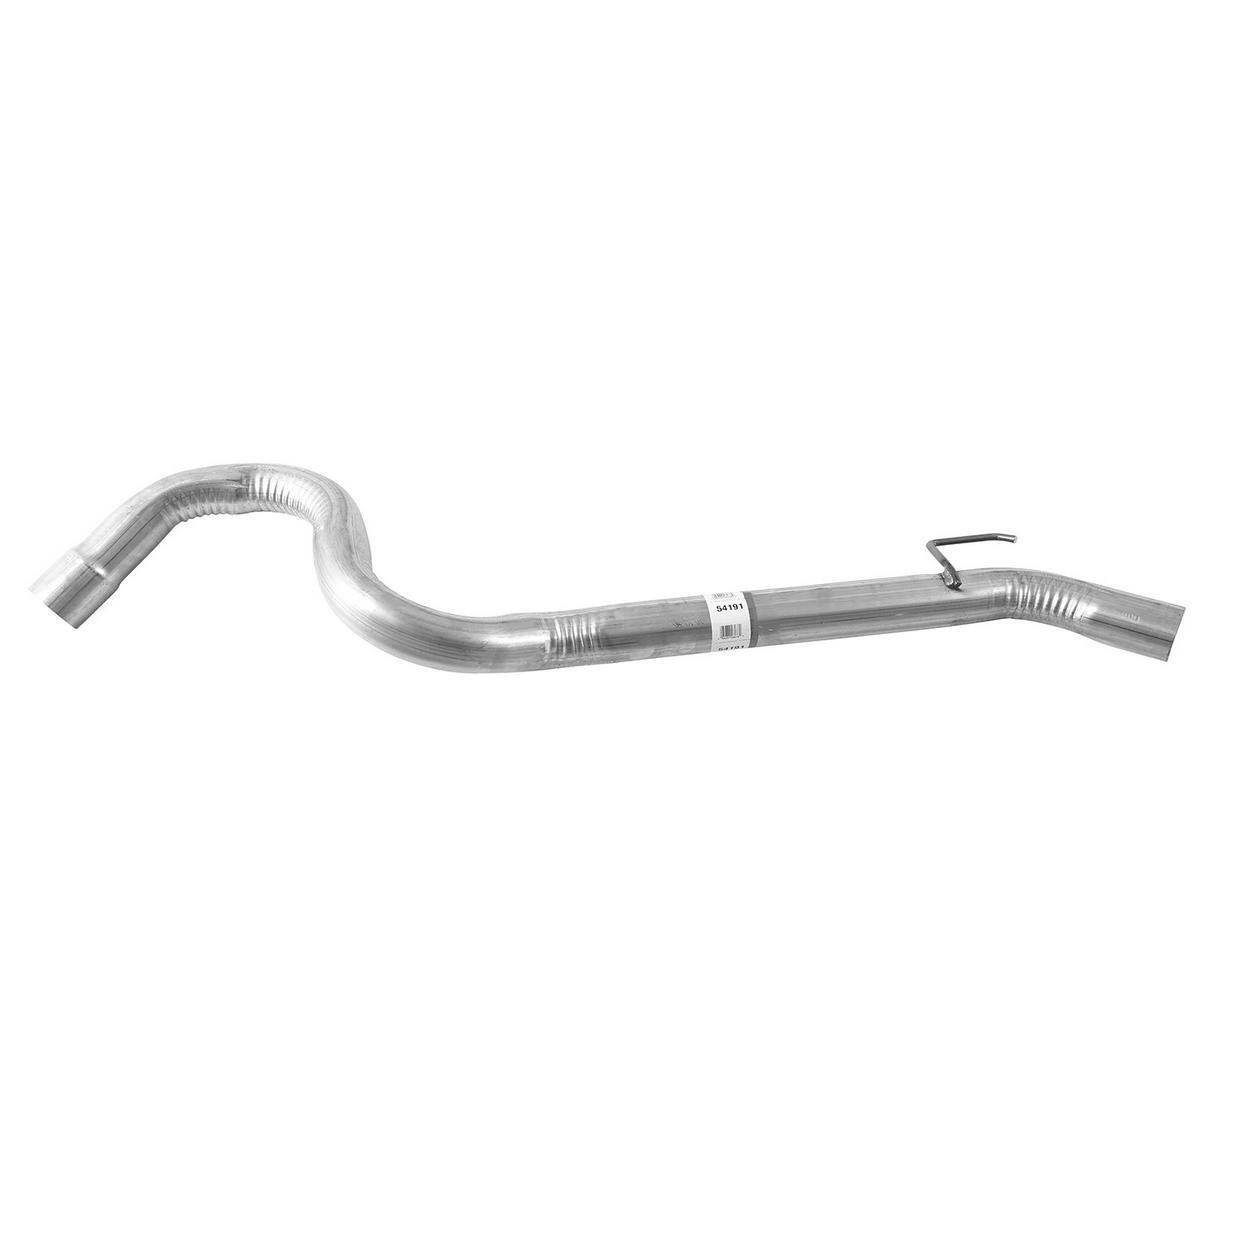 54191-AA Exhaust Tail Pipe Fits 2007 Chrysler Aspen 5.7L V8 GAS OHV